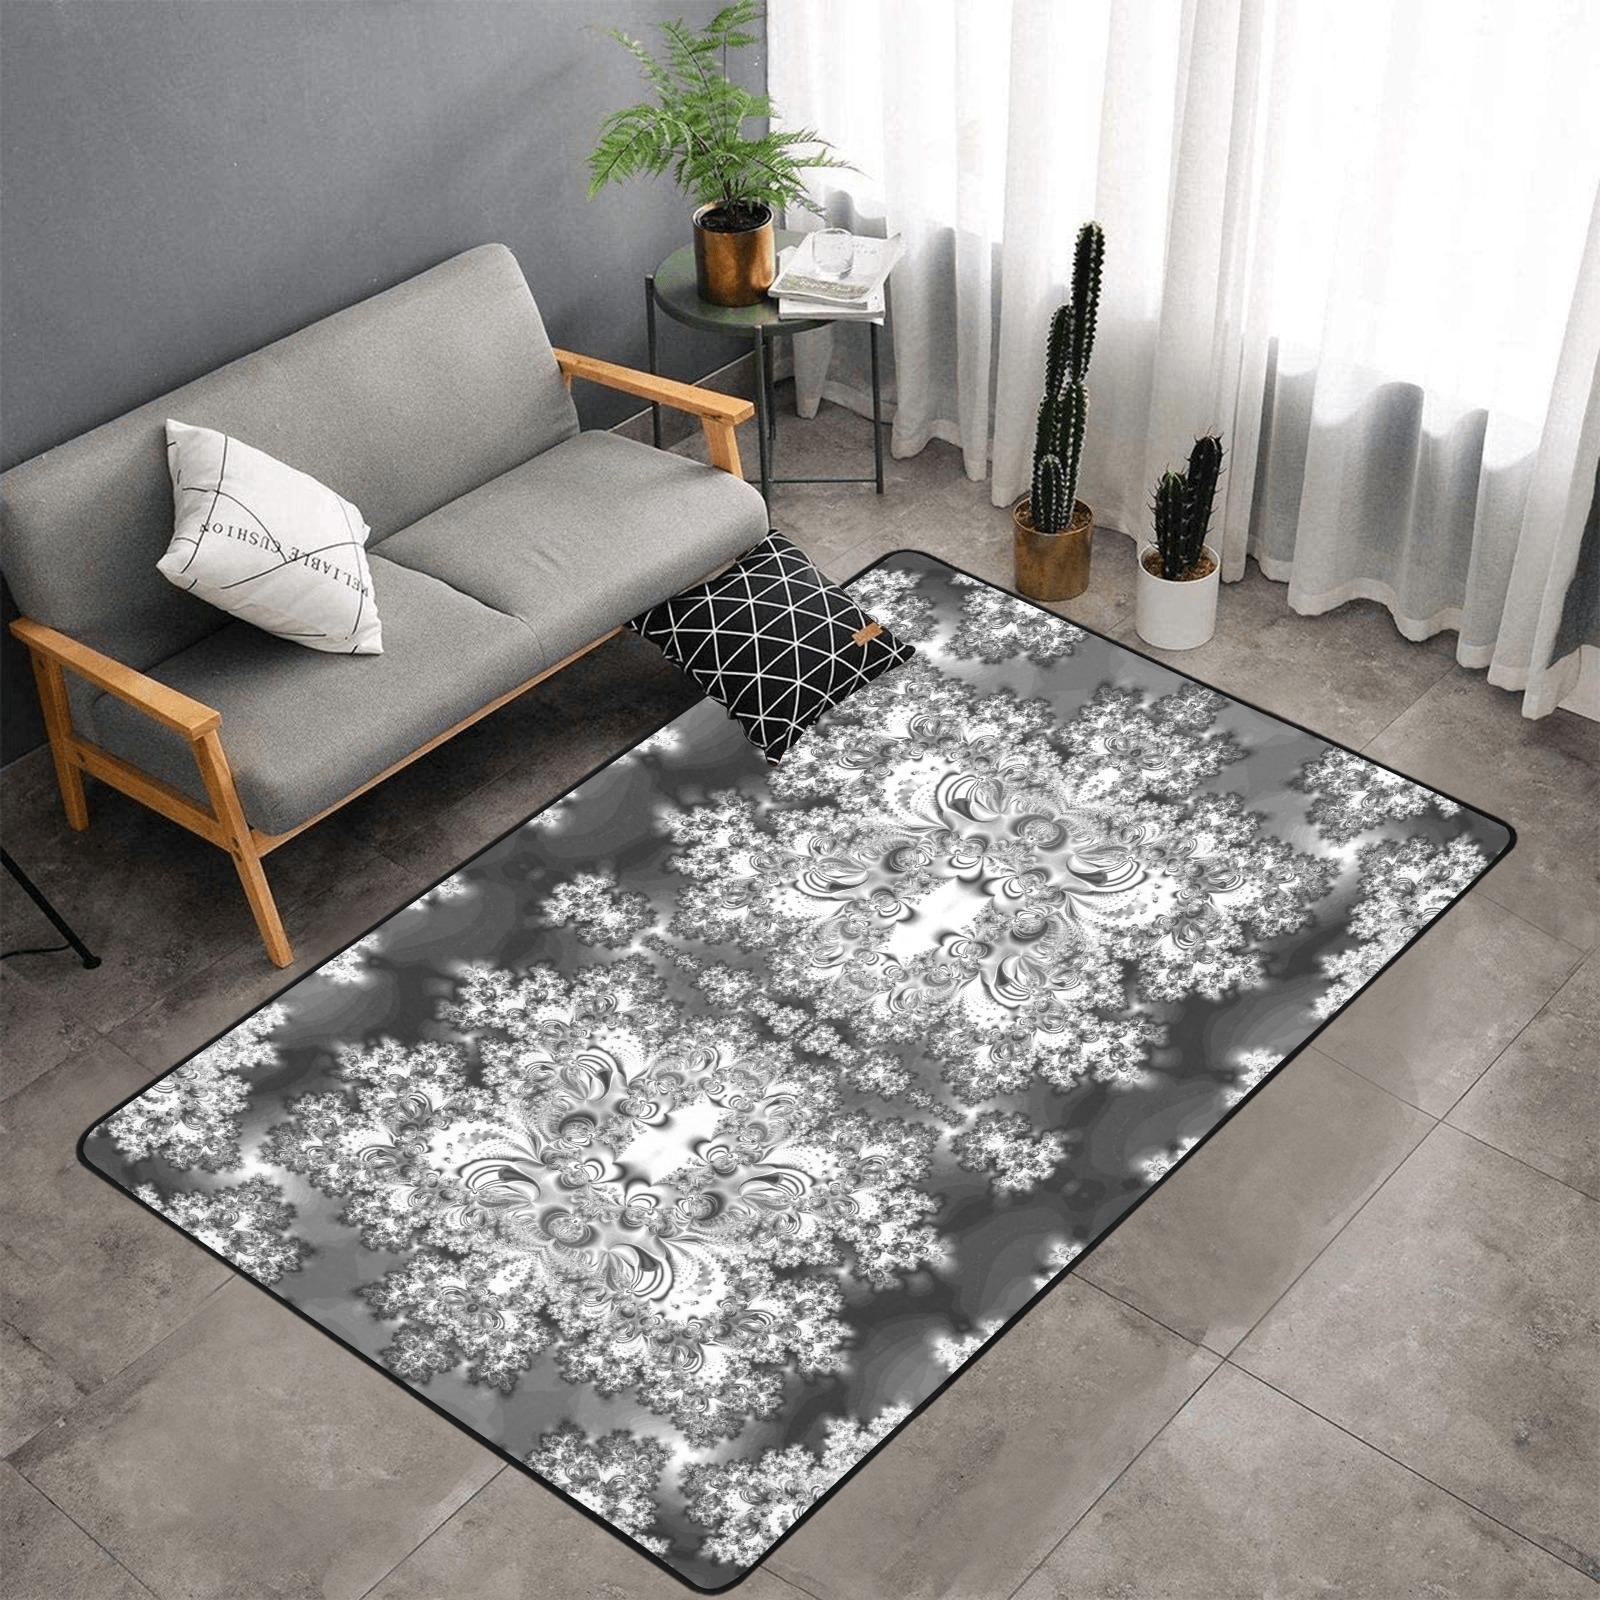 Silver Linings Frost Fractal Area Rug with Black Binding 7'x5'